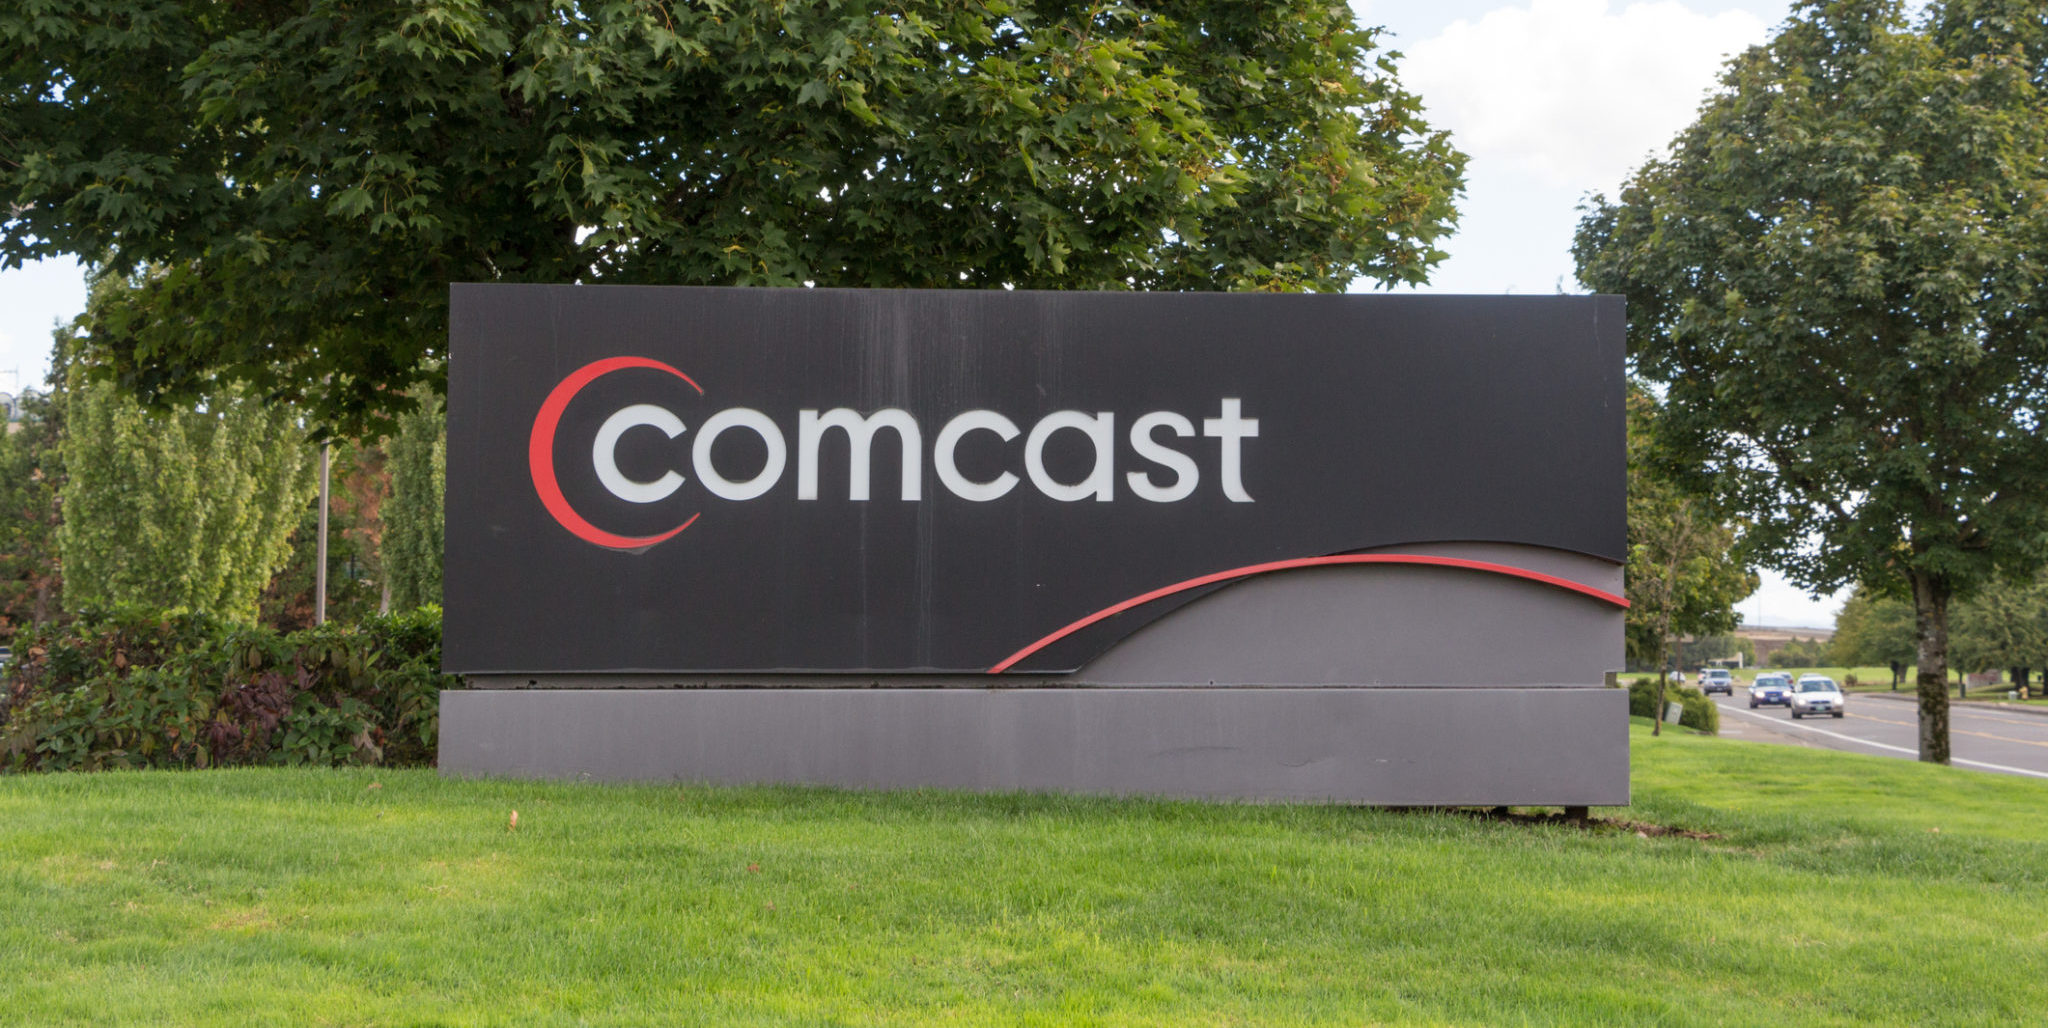 Comcast Lost 440,000 Pay TV Customers in Q4 2022